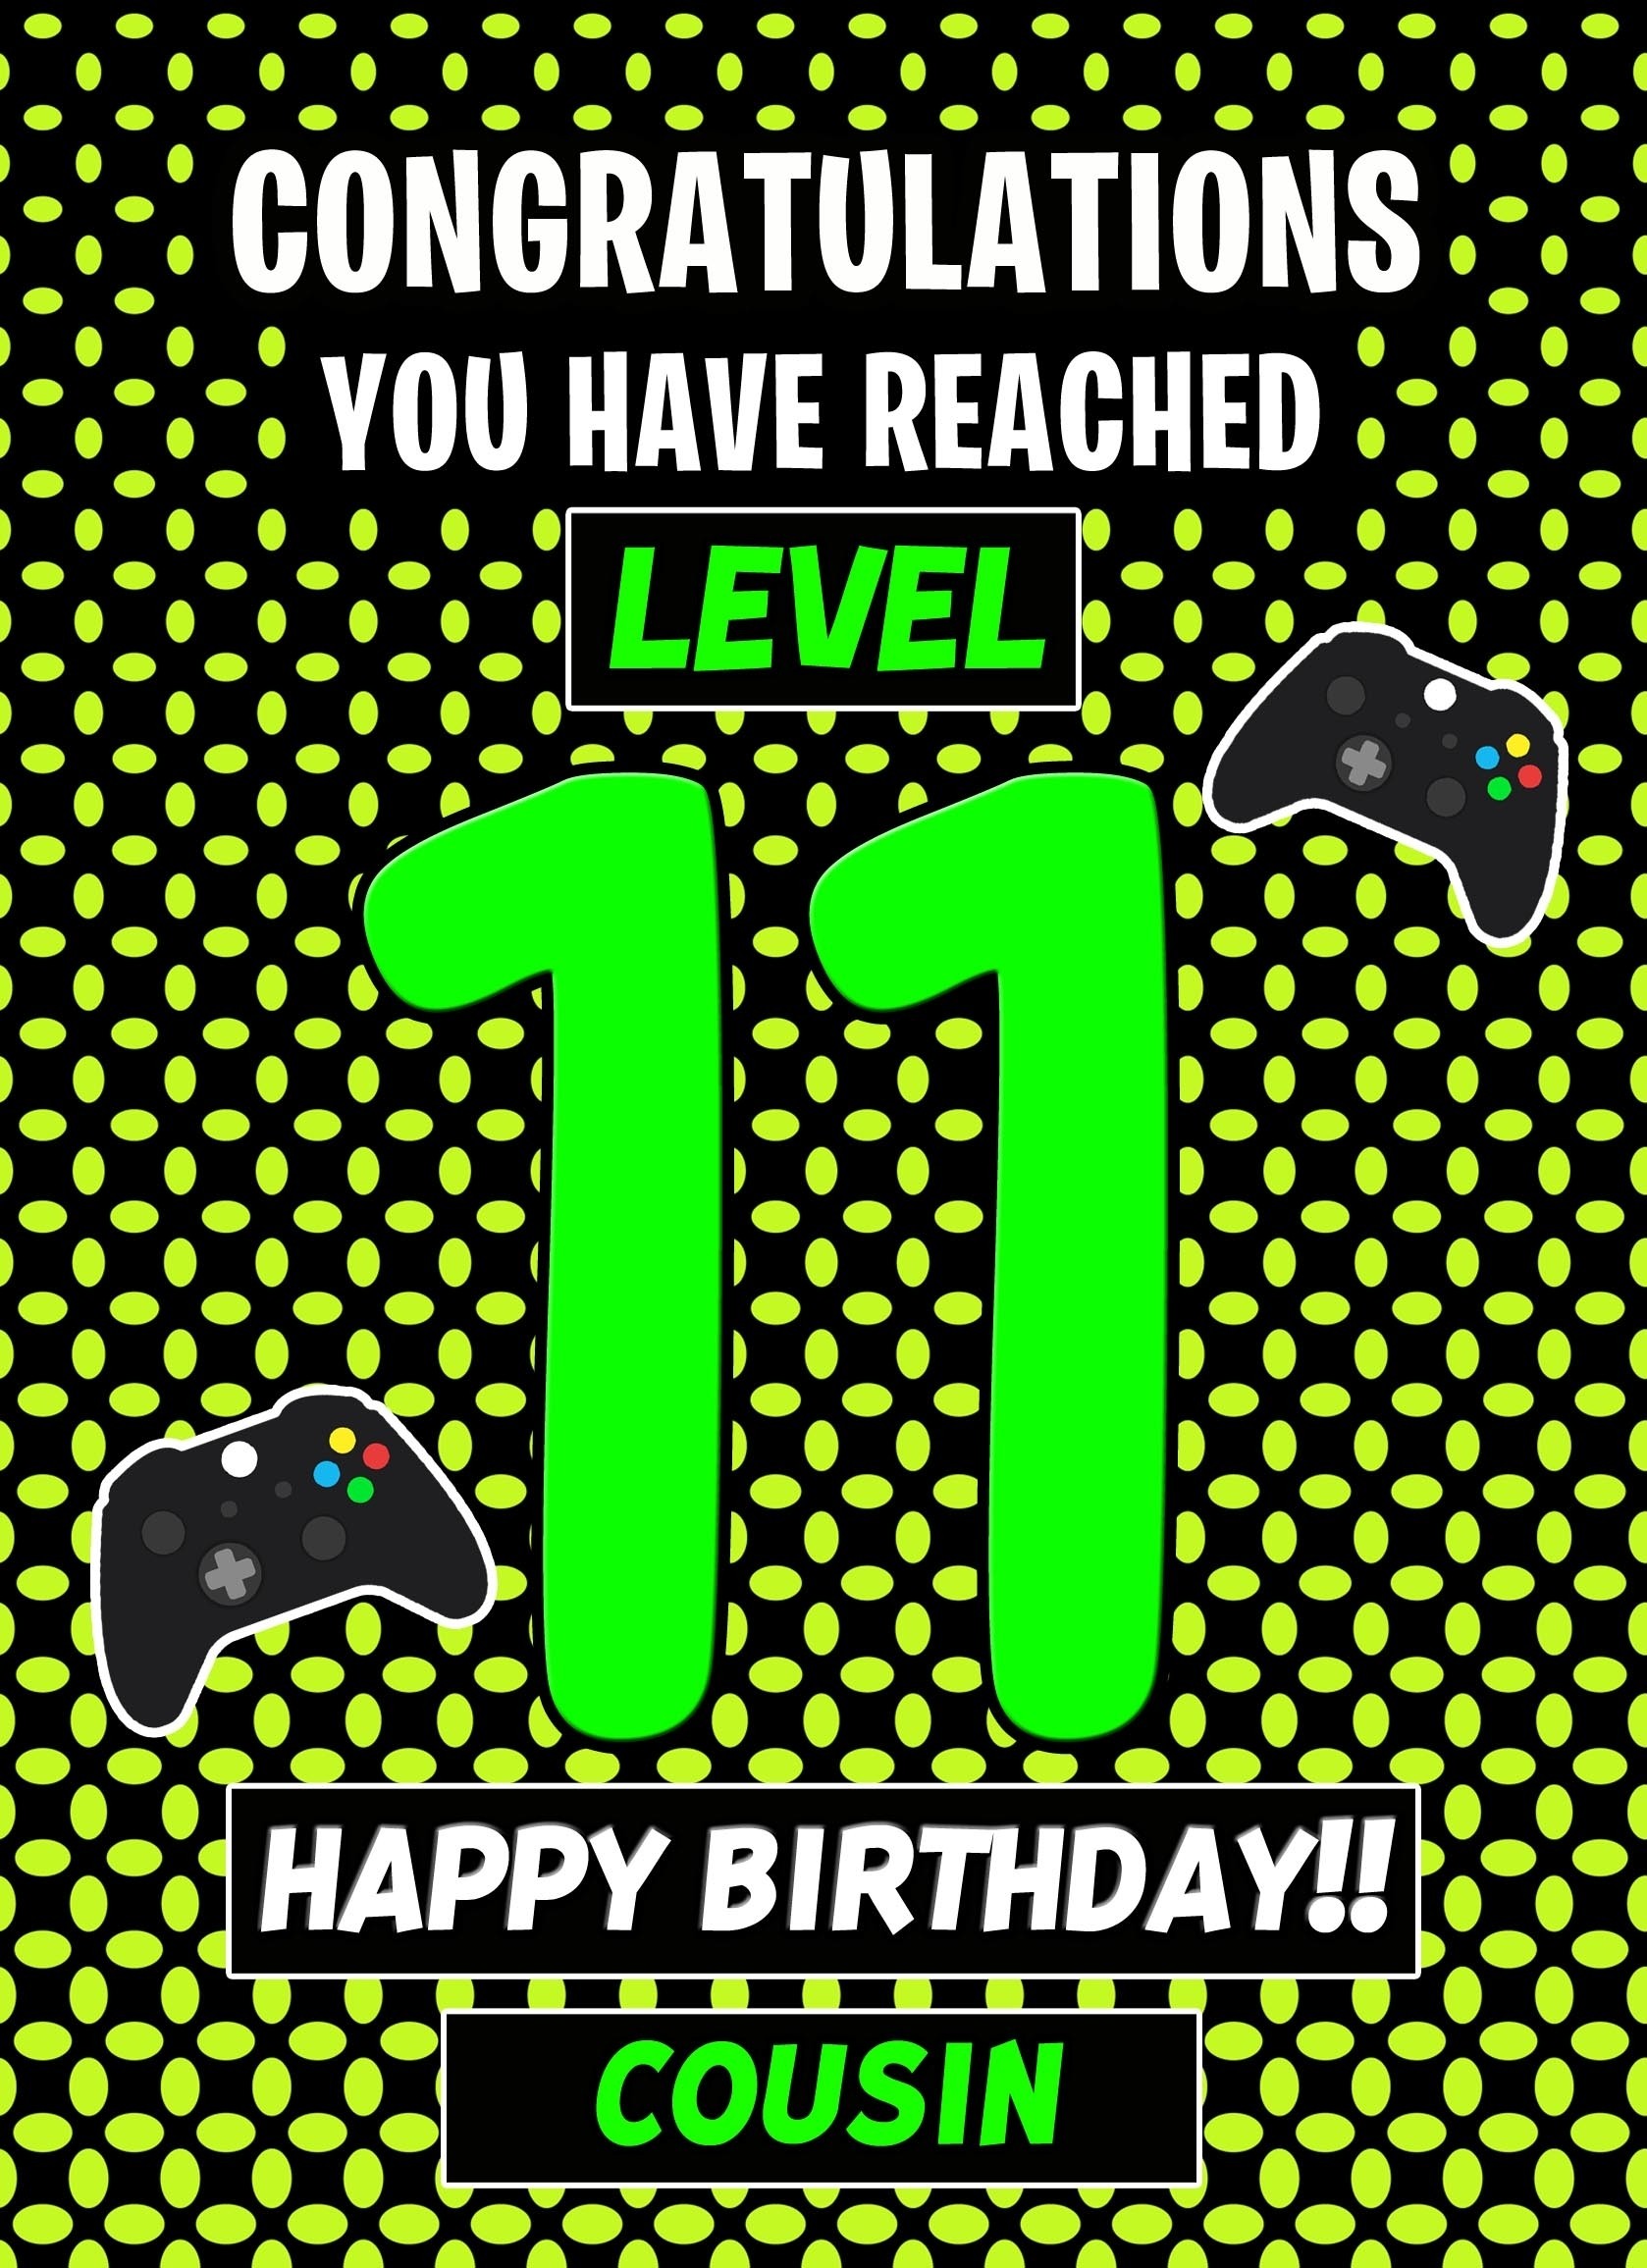 Cousin 11th Birthday Card (Level Up Gamer)